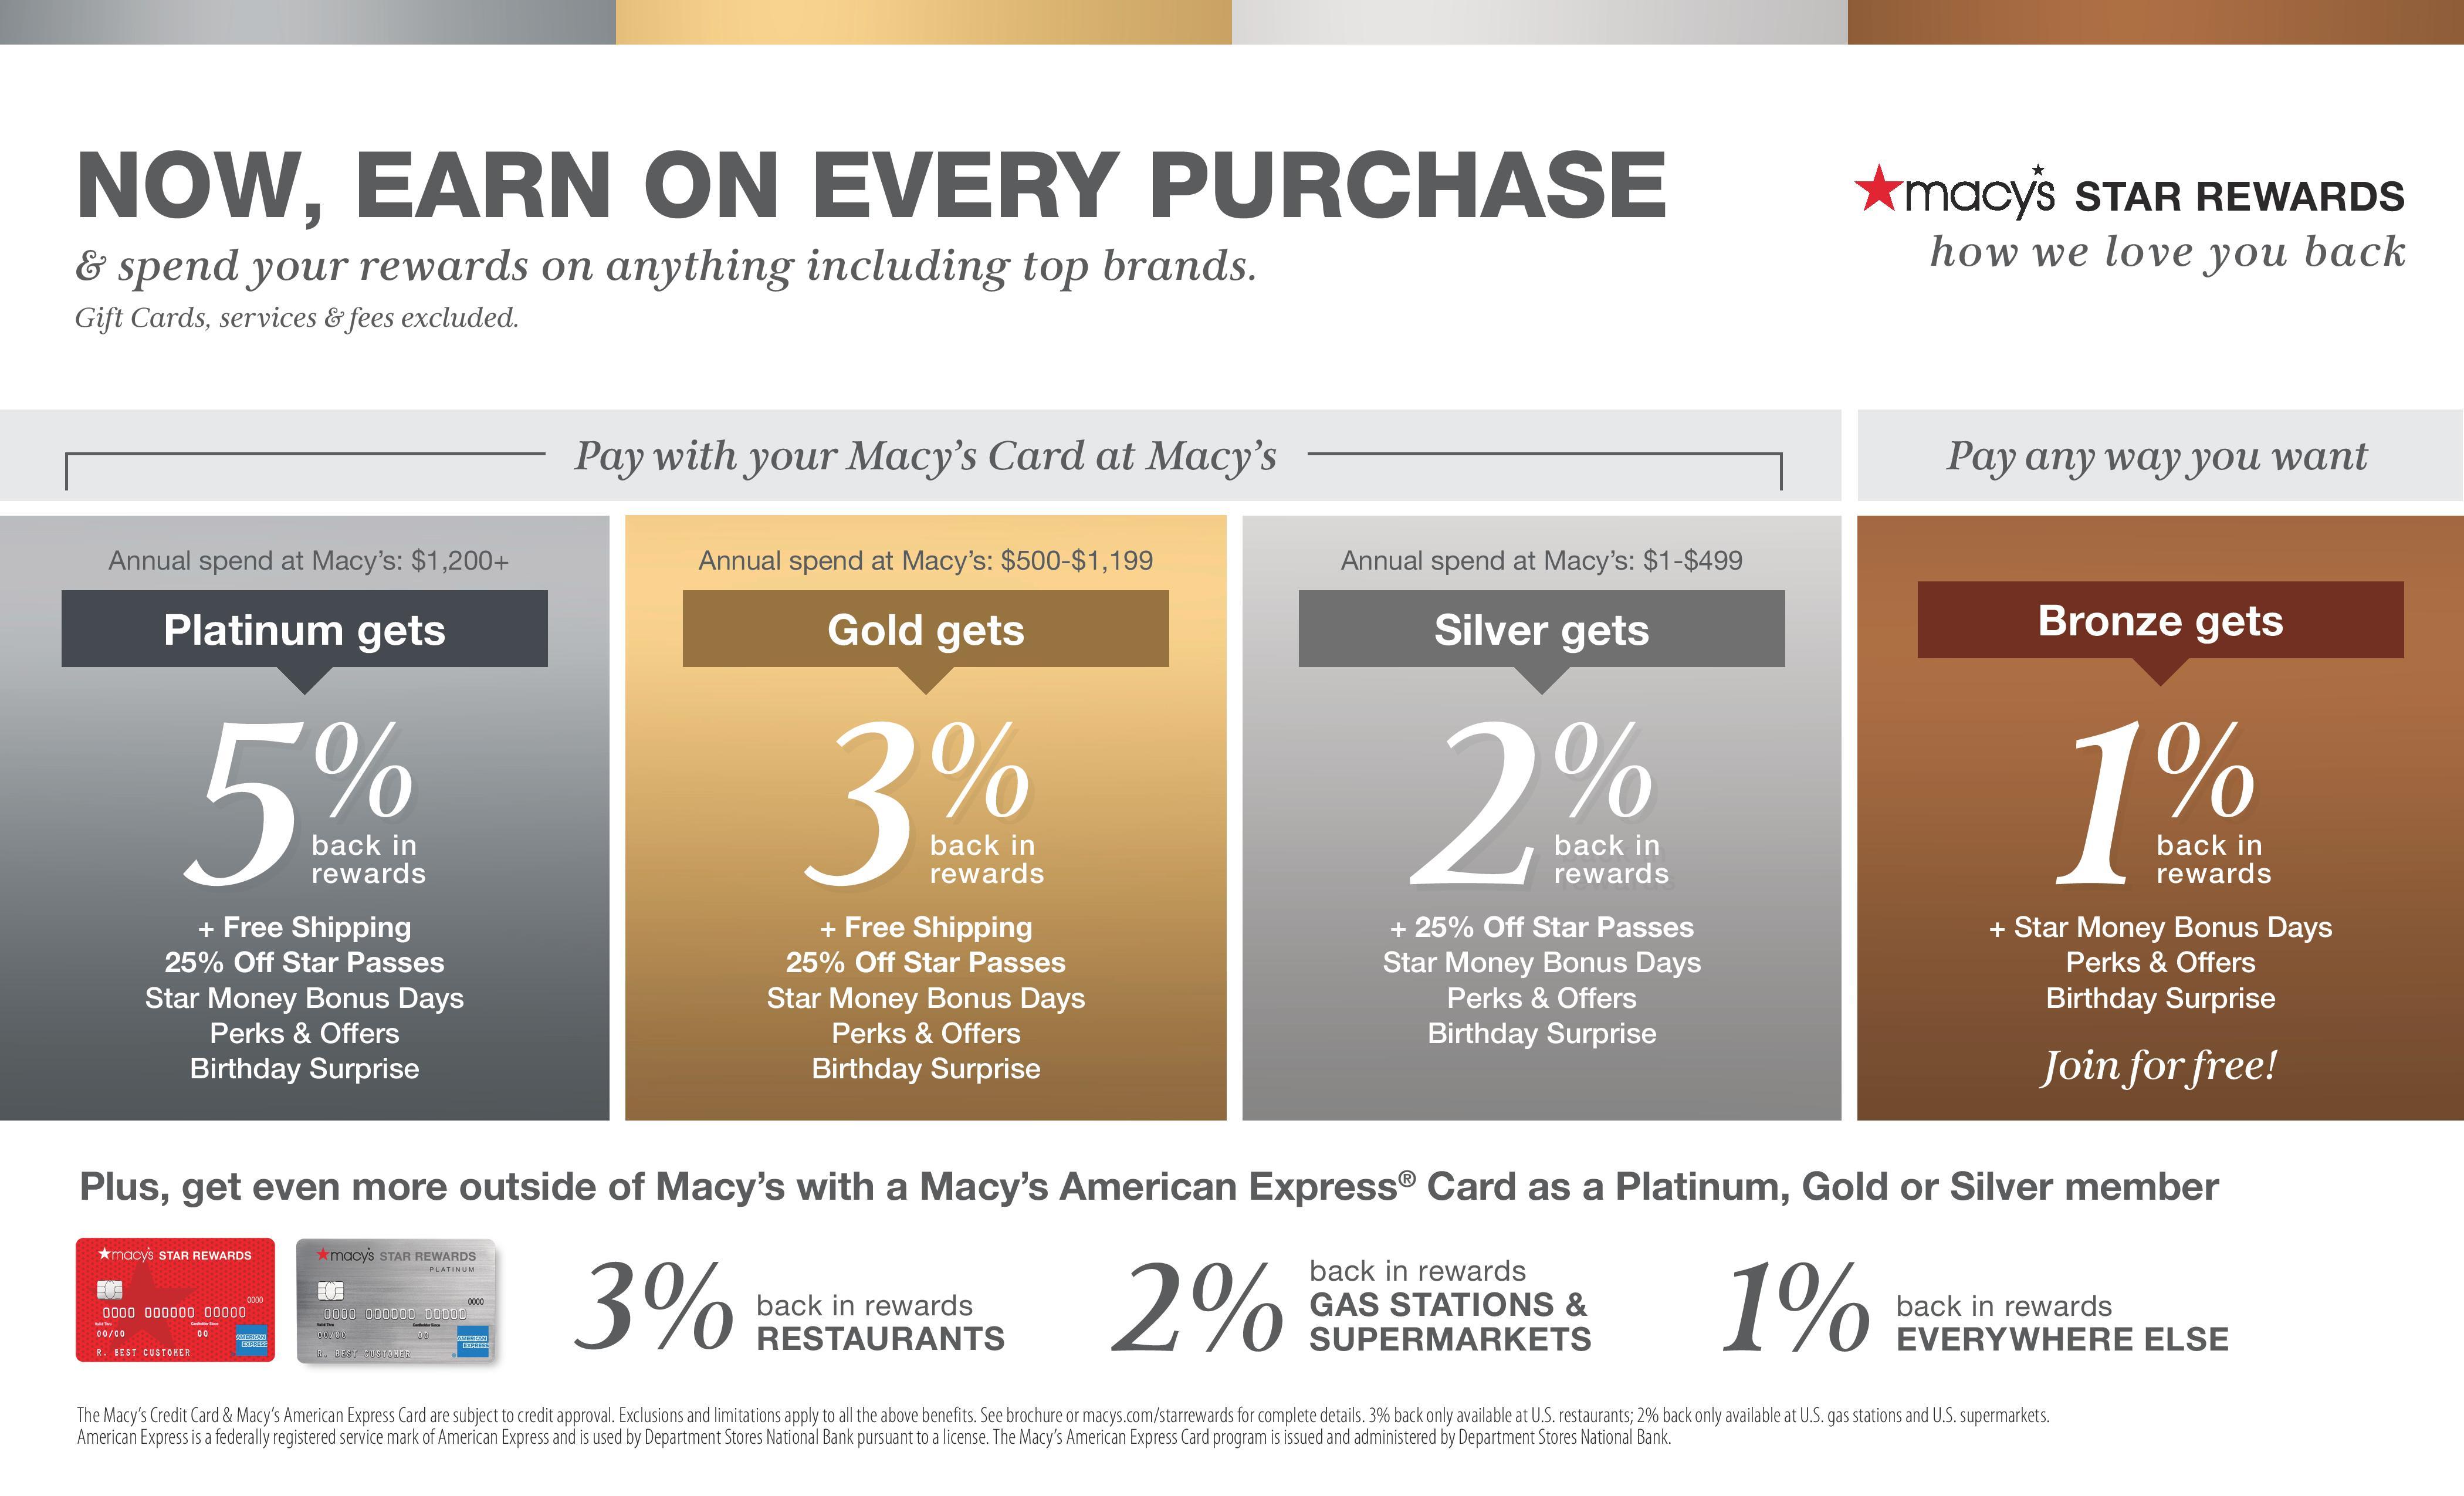 Macy S Launches Next Phase Of Loyalty Program Everyone Now Earns Everyday On Macy S Purchases With Star Rewards Business Wire